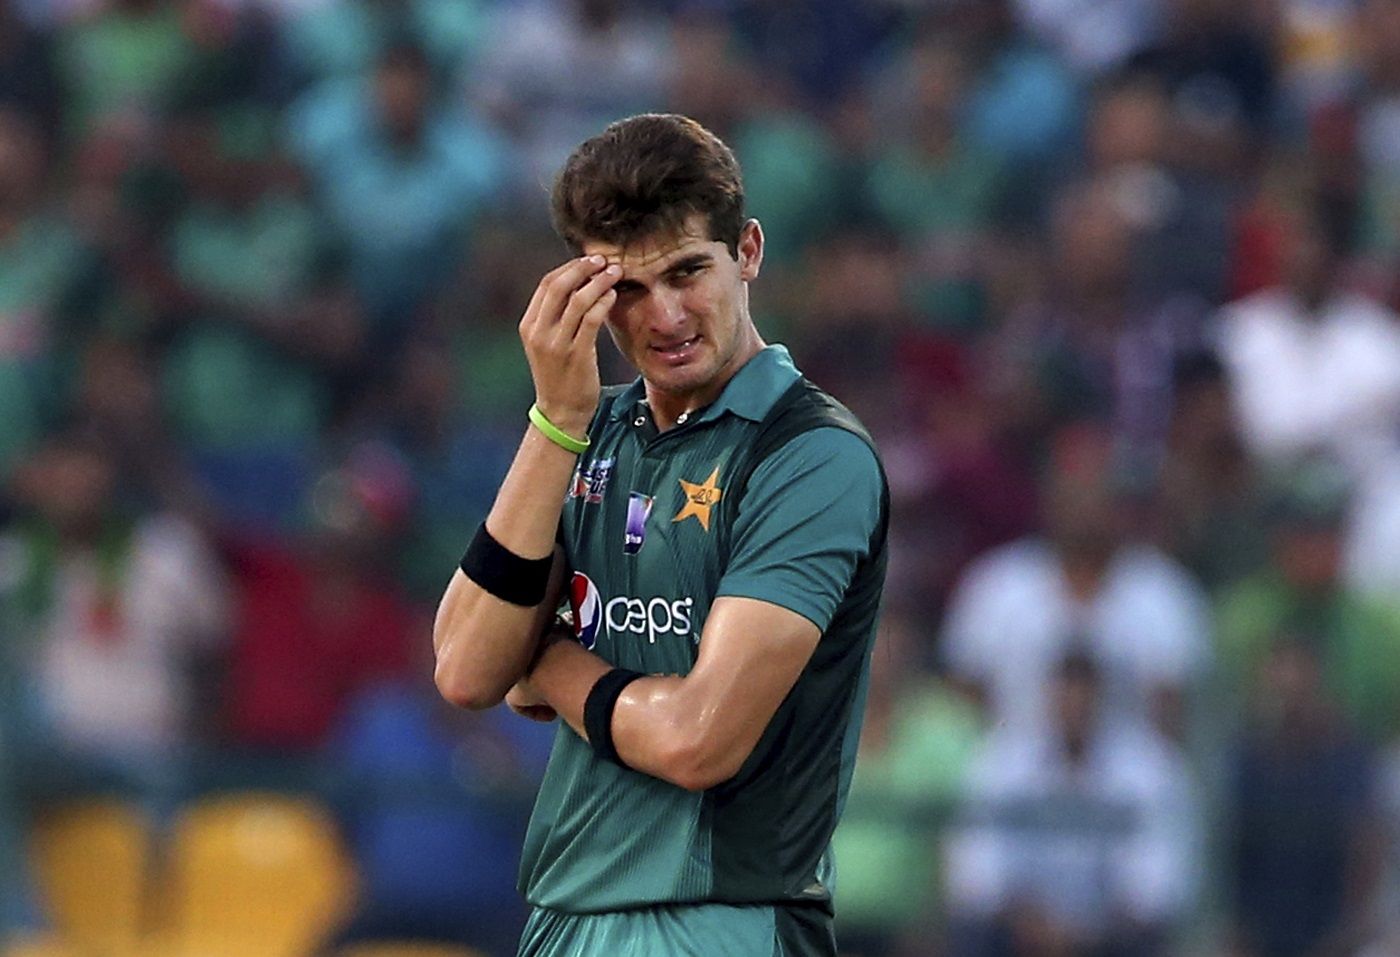 Shaheen Afridi reacts after a shot is played off his bowling